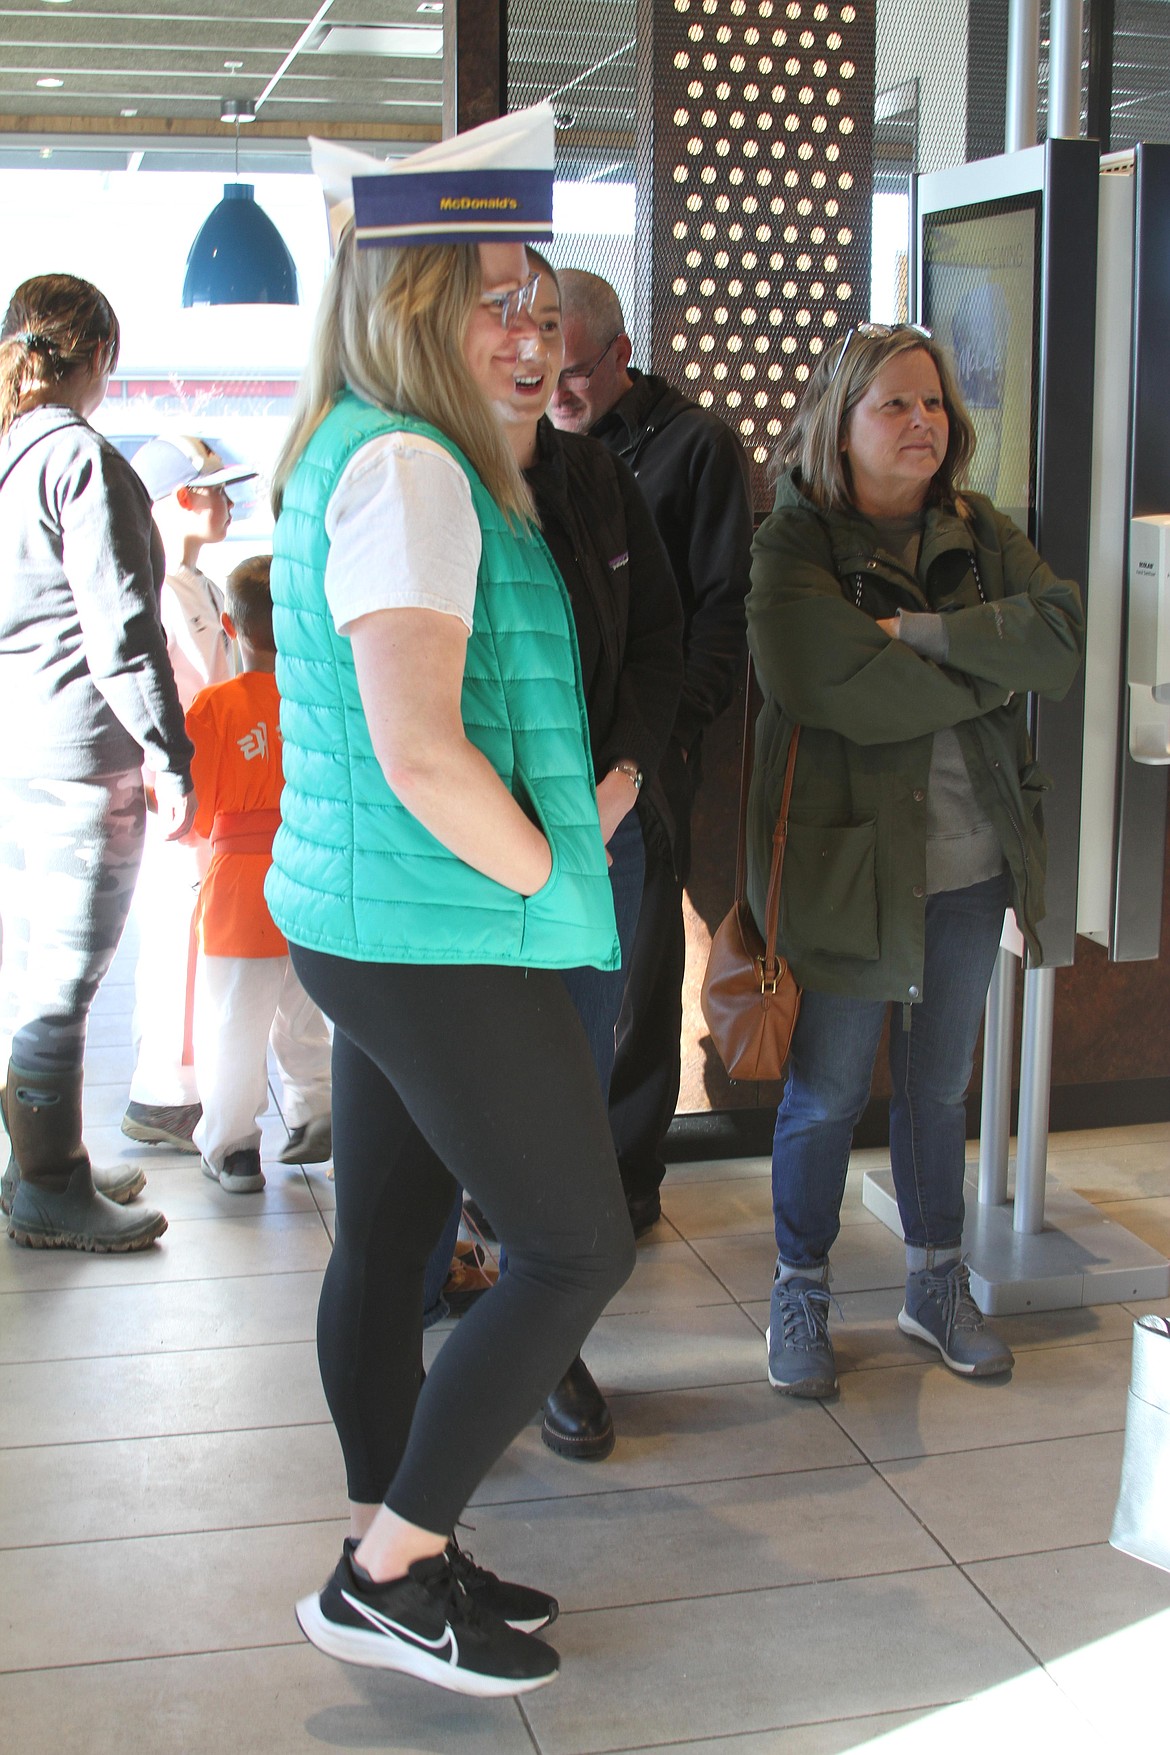 Kootenai Elementary principal Kellie Knowles welcomes students and their families into the Ponderay McDonald's at a McTeacher's Night fundraiser.